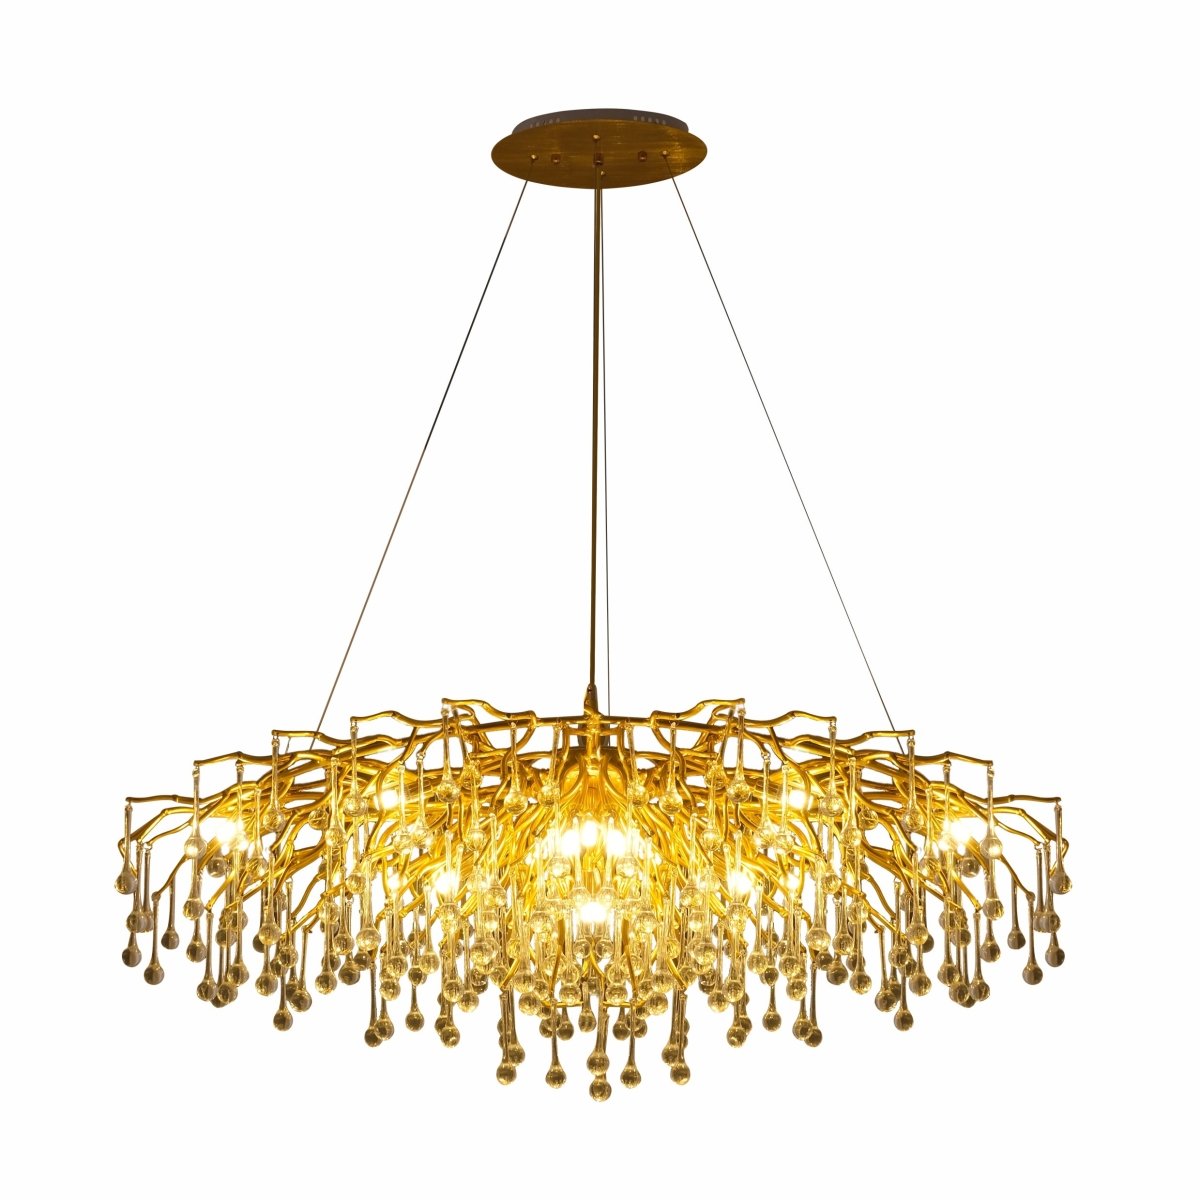 Main image of Modern Crystal Glass Droplet Chandelier with 13xG9 Fittings 1200mm | TEKLED 159-17530